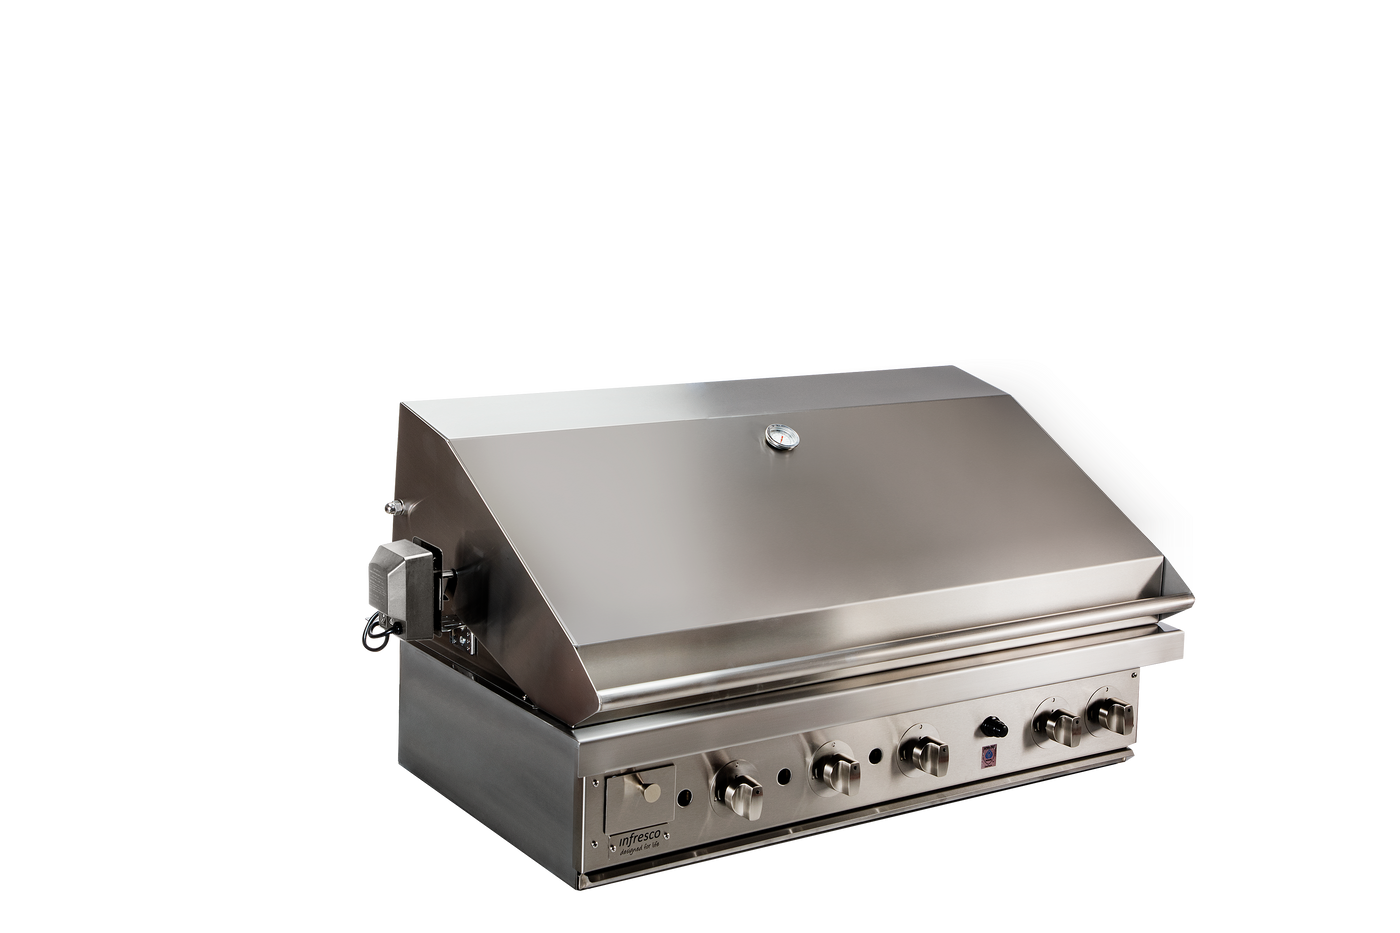 Infresco 985mm Barbecue - 665mm Hotplate/320mm Grill with Roasting hood